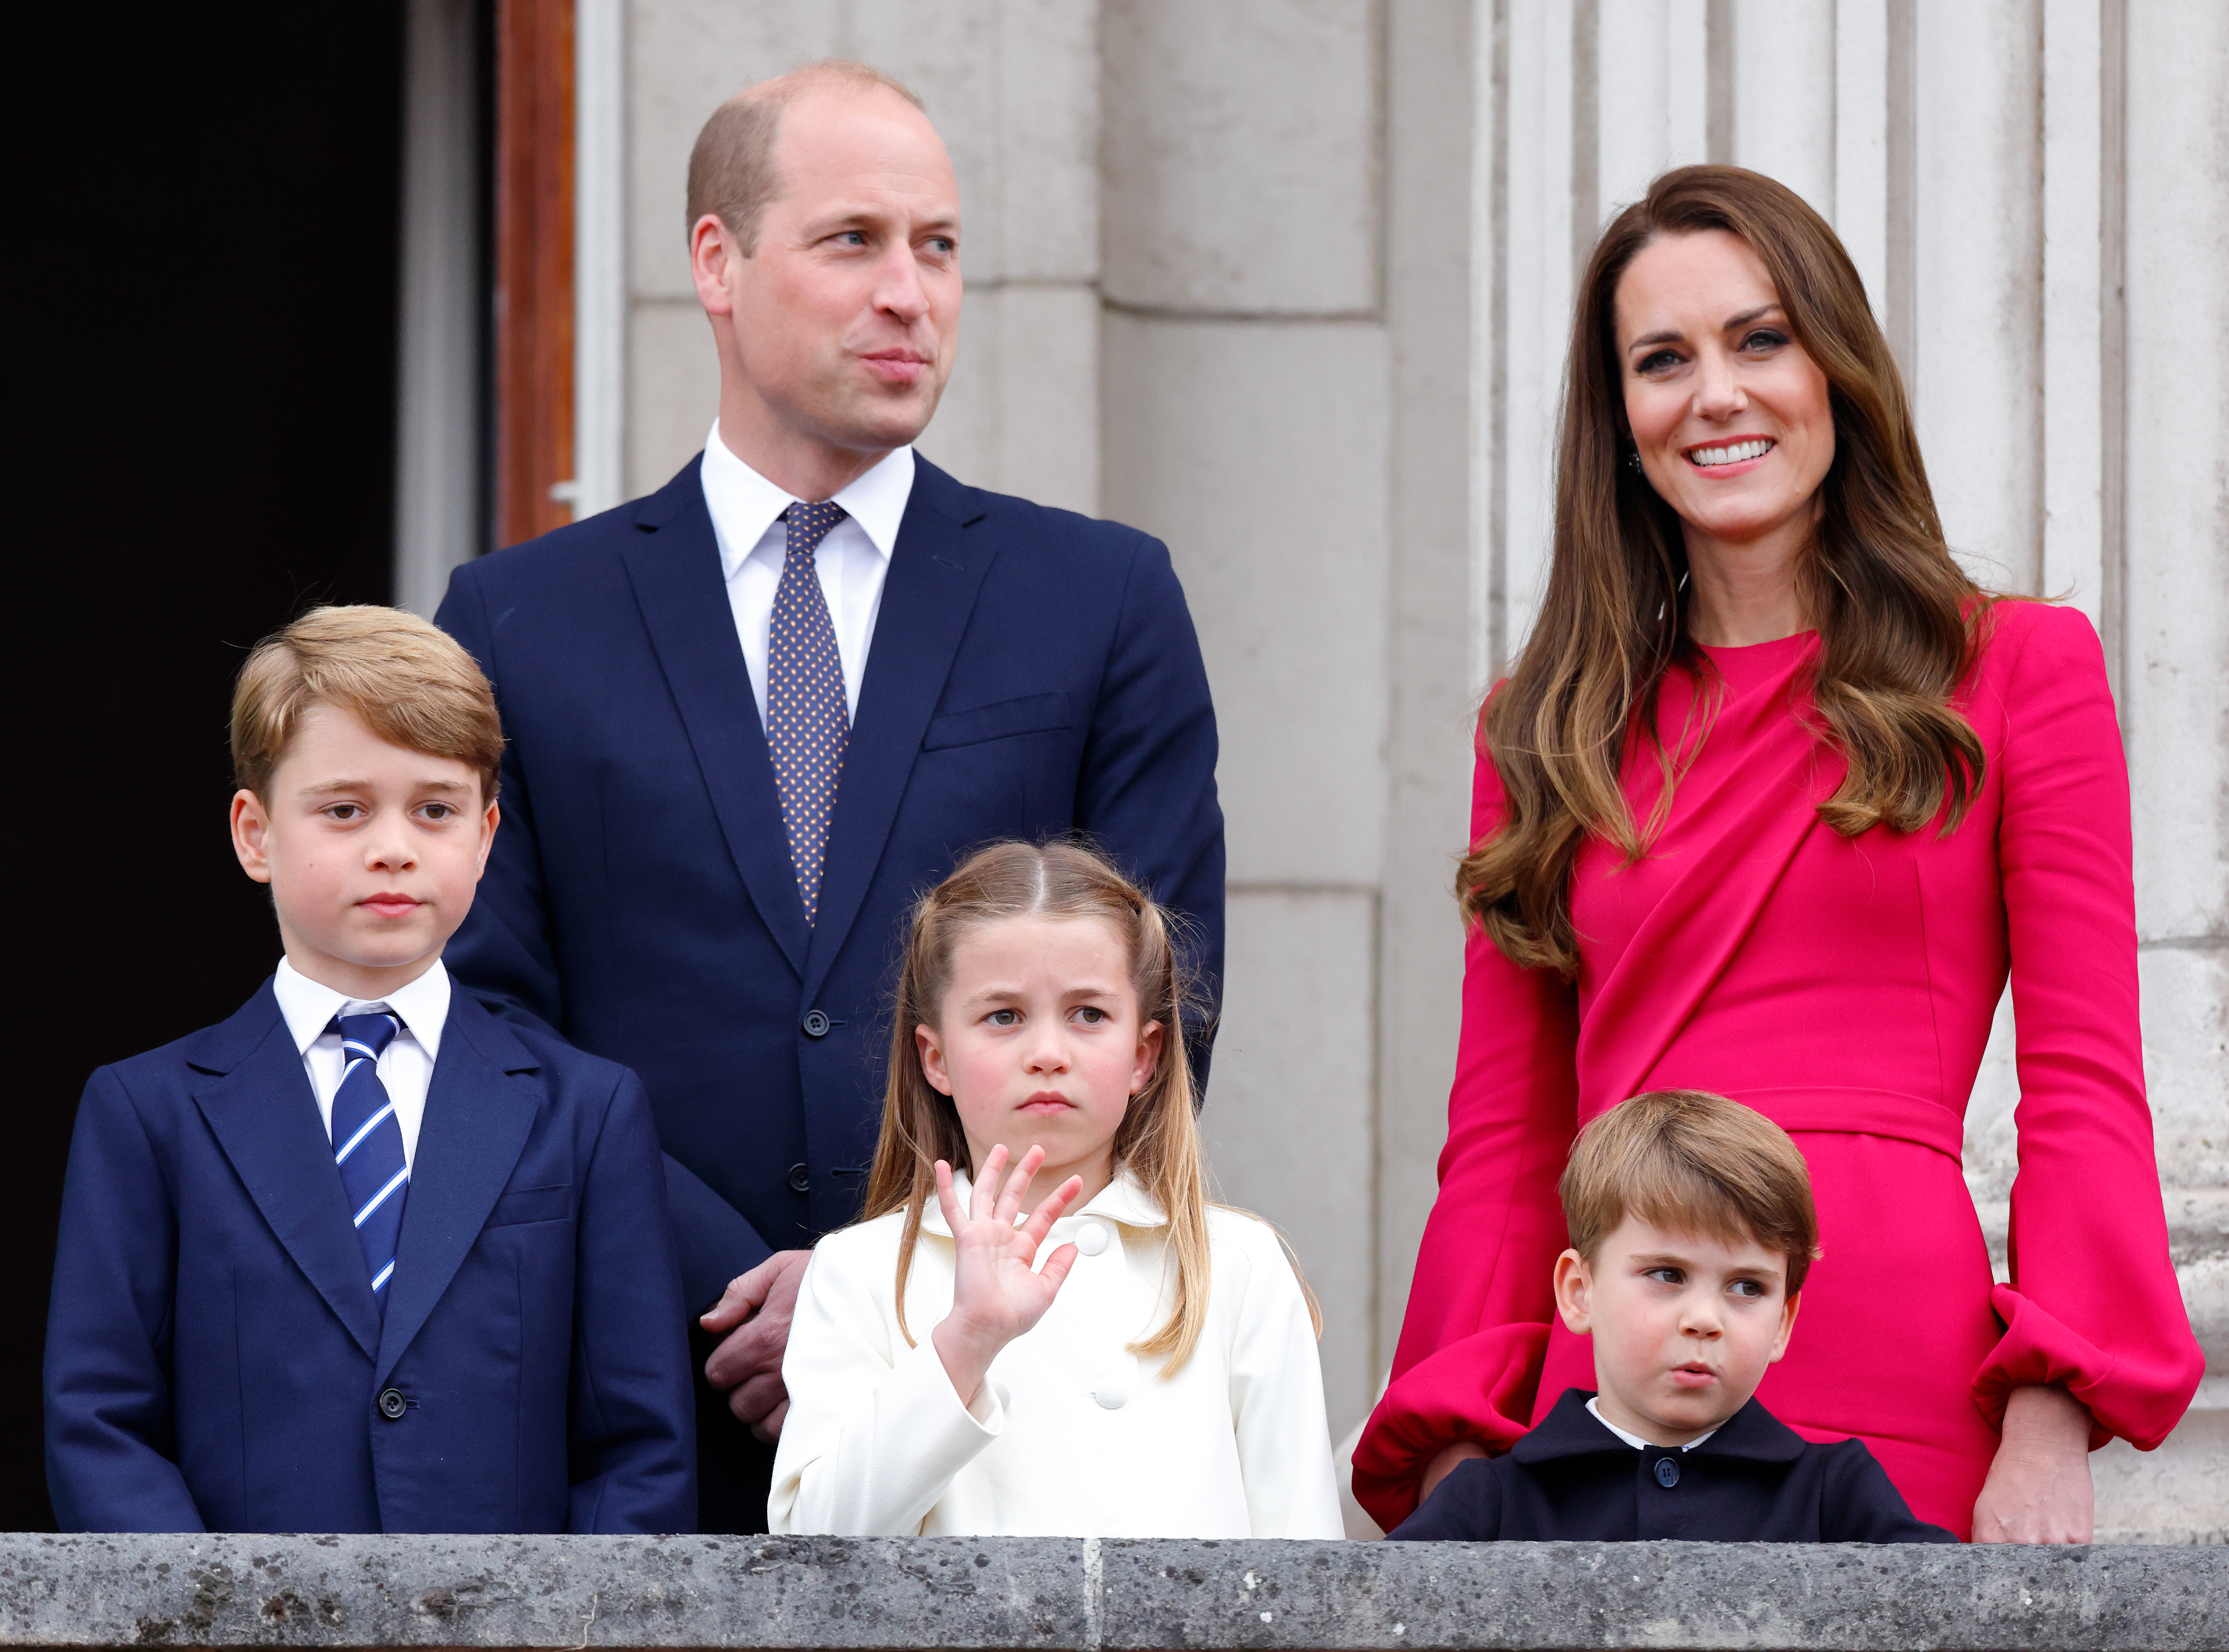 Prince George, Prince William, Princess Charlotte, Prince Louis, and Kate Middleton stand on the balcony of Buckingham Palace on June 5, 2022 in London, England. | Source: Getty Images